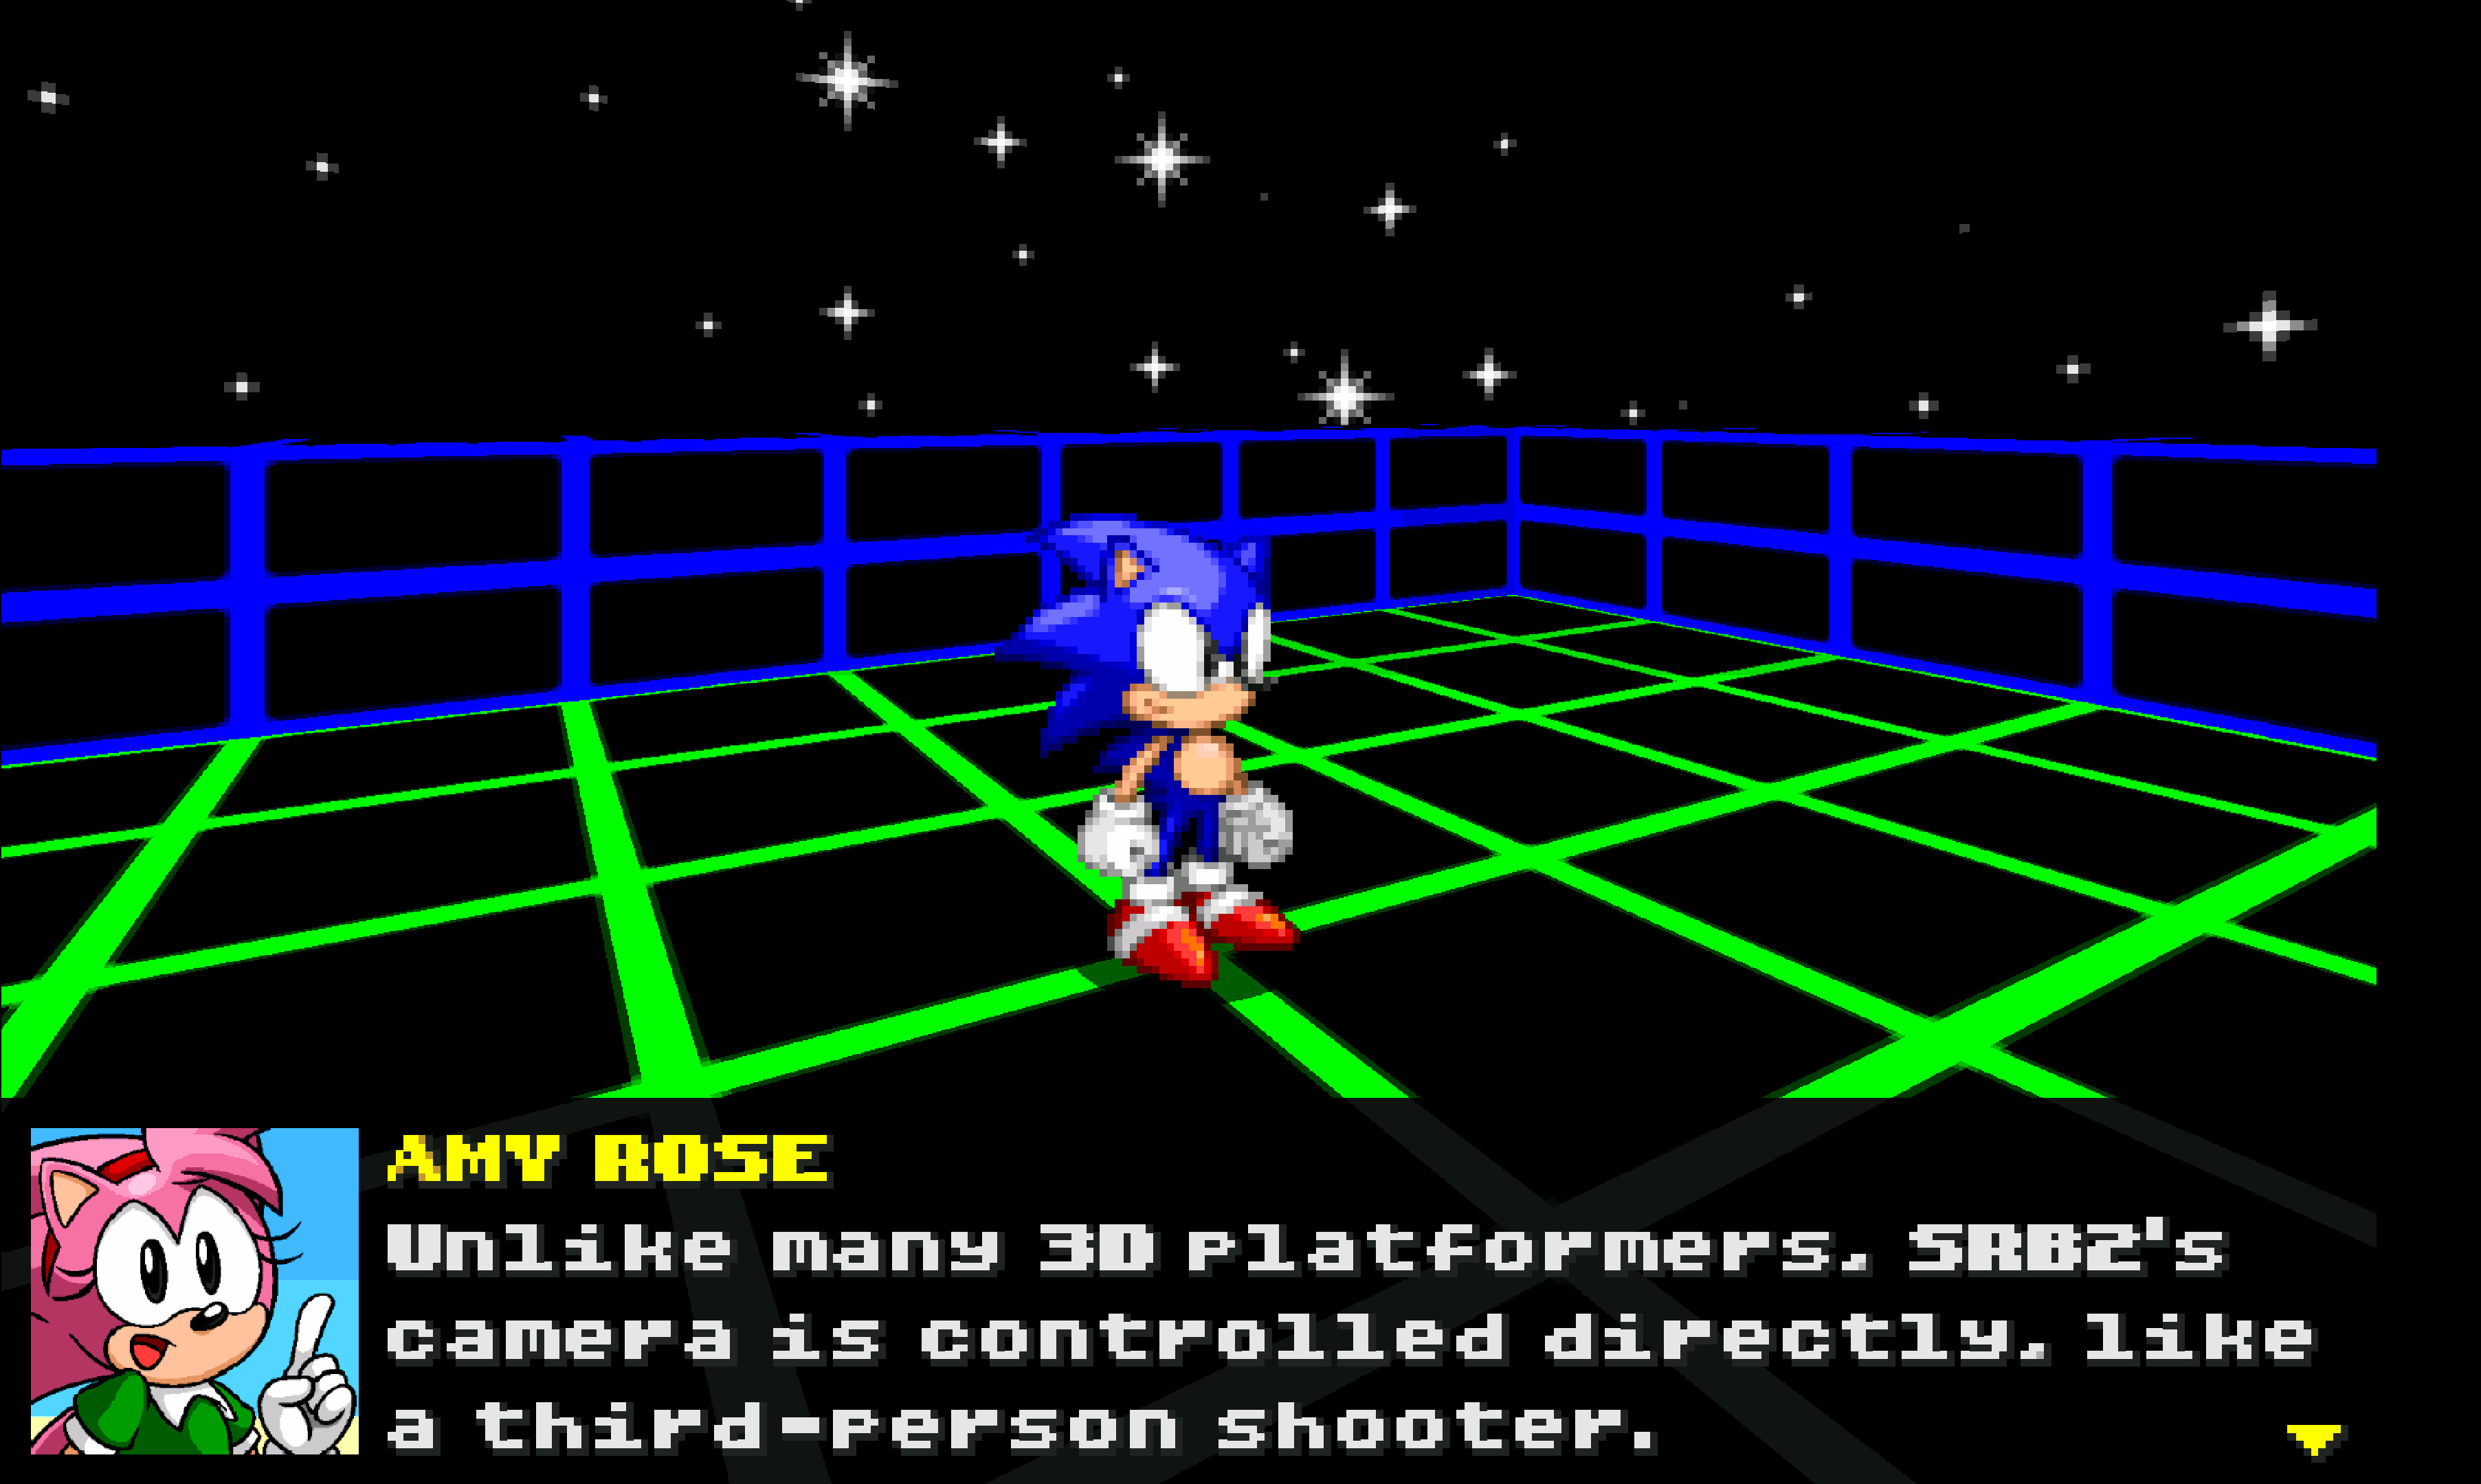 How to install and setup models. [Sonic Robo Blast 2] [Tutorials]